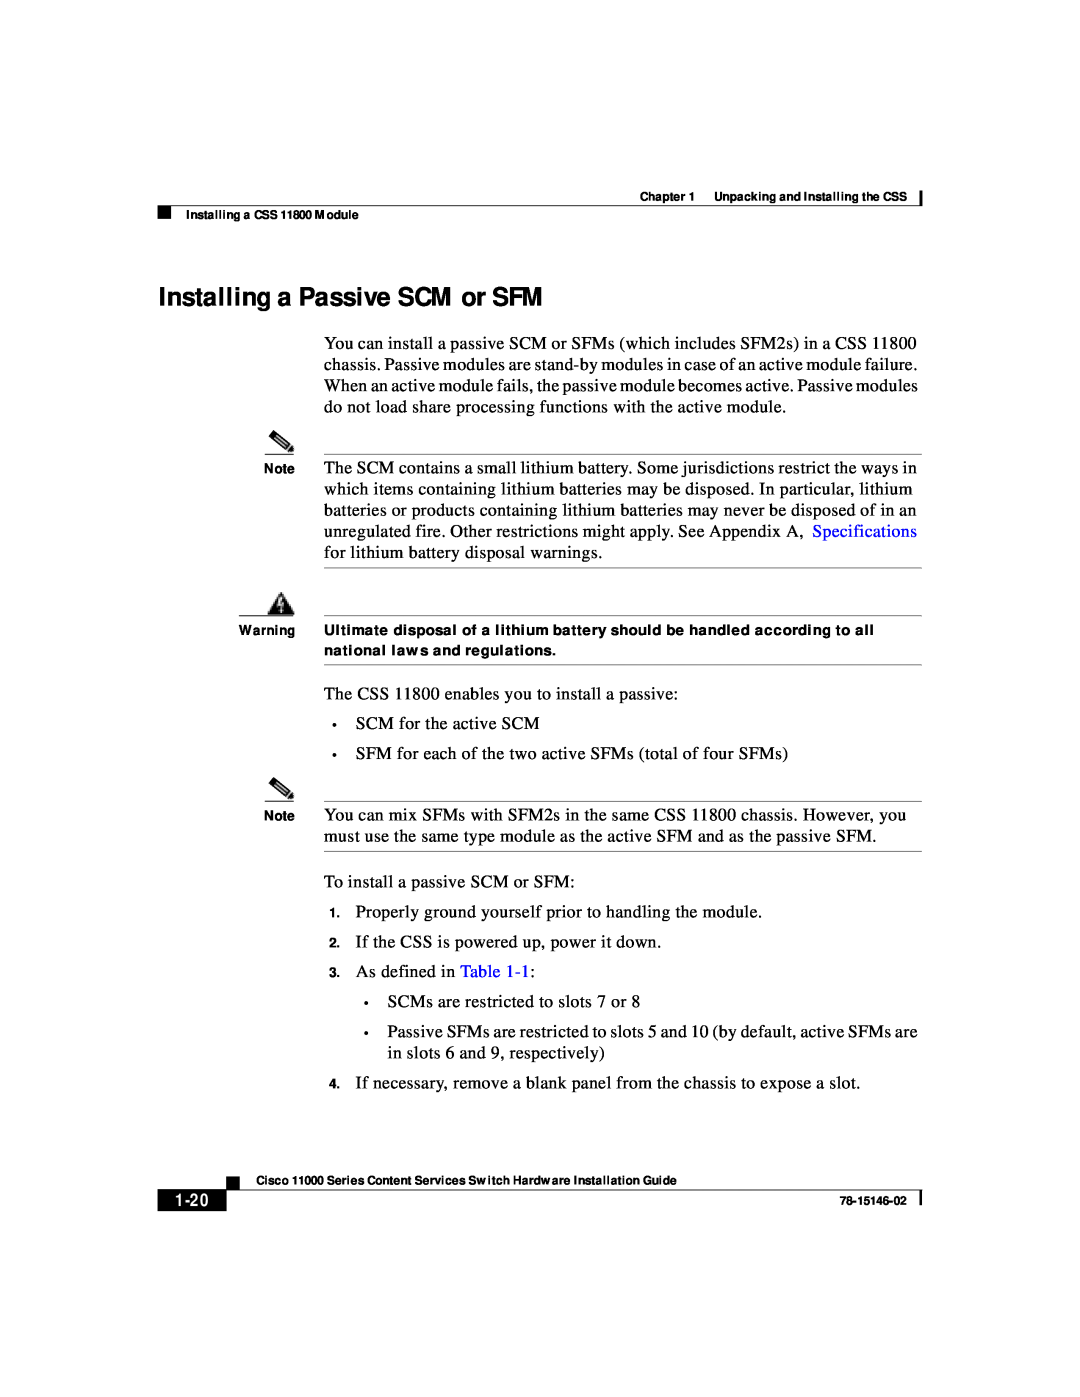 Cisco Systems 11000 Series manual Installing a Passive SCM or SFM, 1-20 